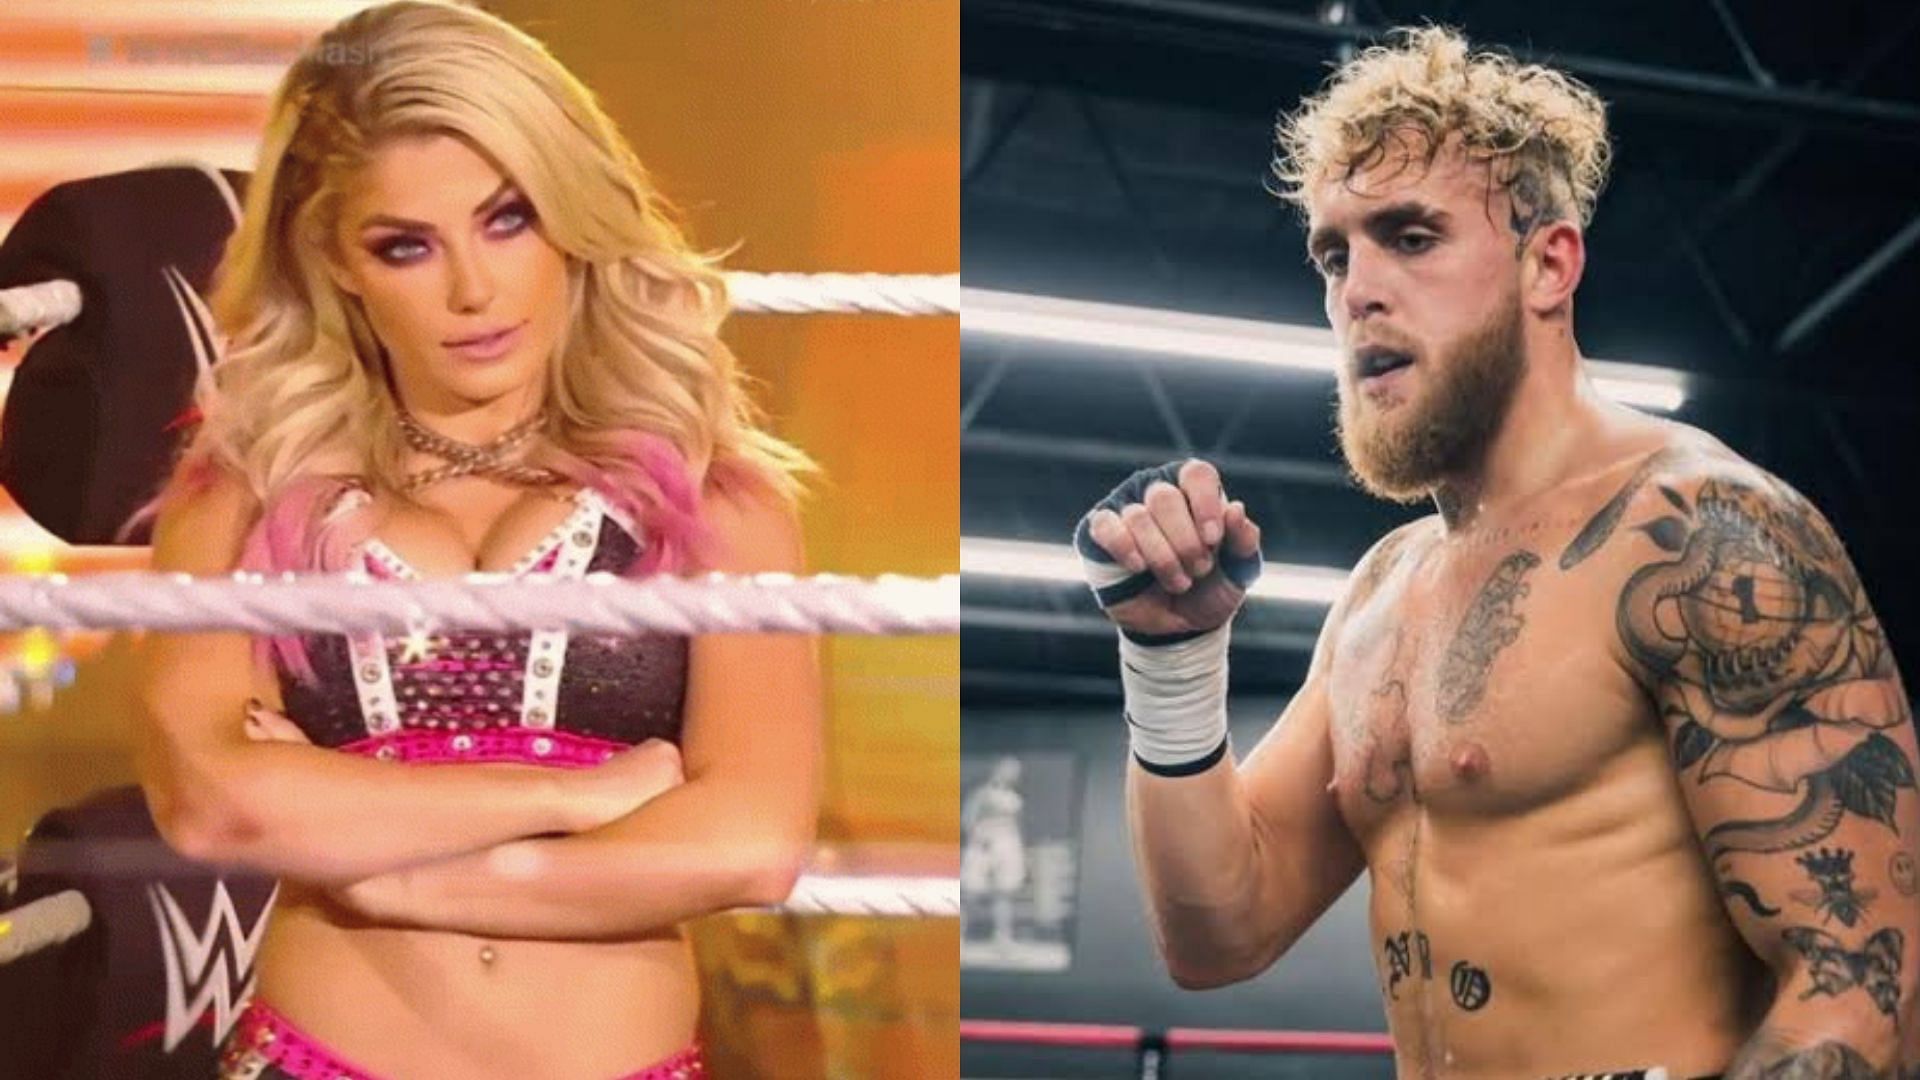 Alexa Bliss (L) has sent a message to Jake Paul after WrestleMania 38 (R)